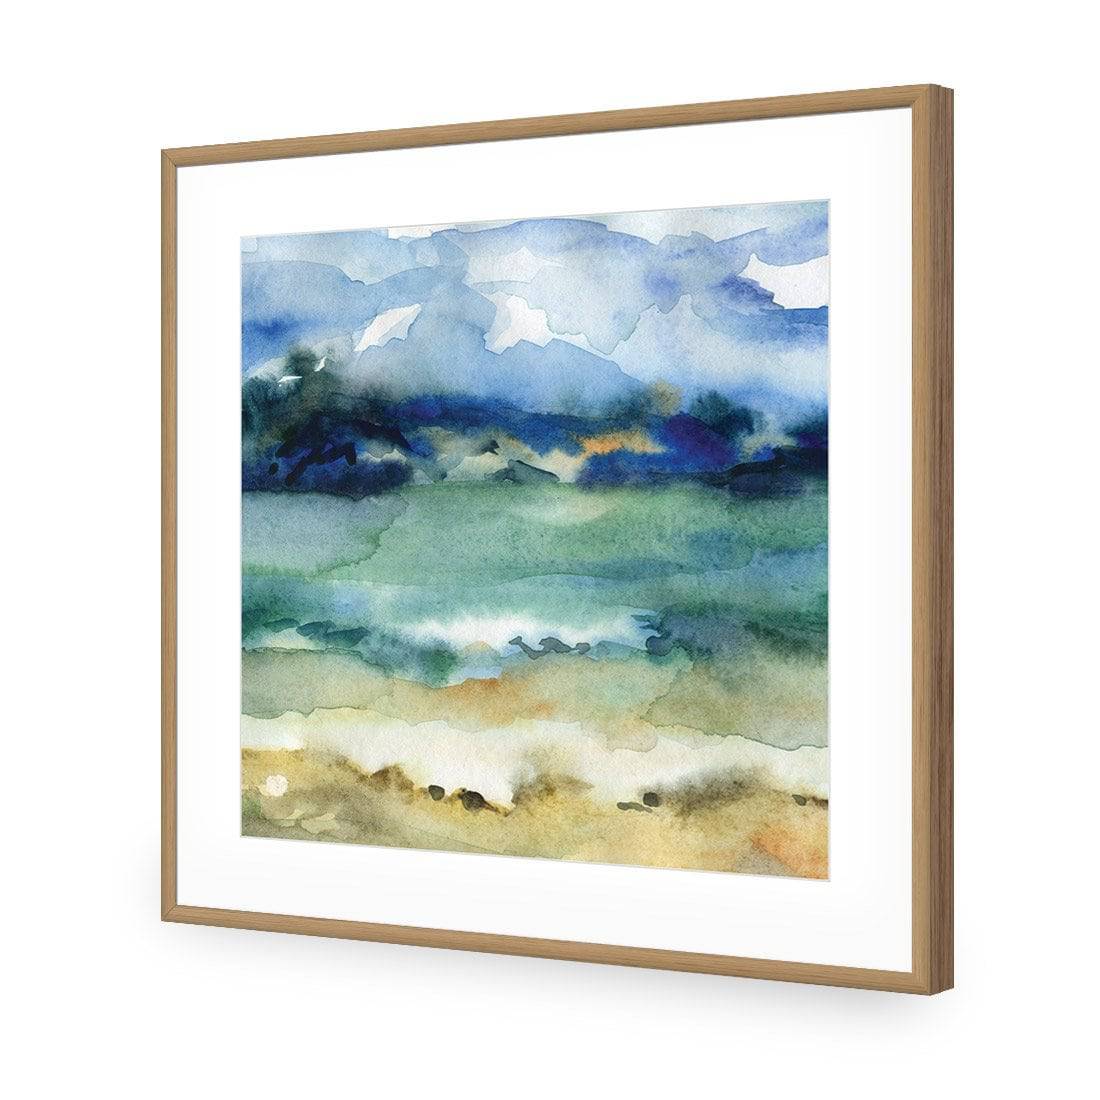 Timeless, Square-Acrylic-Wall Art Design-With Border-Acrylic - Oak Frame-37x37cm-Wall Art Designs